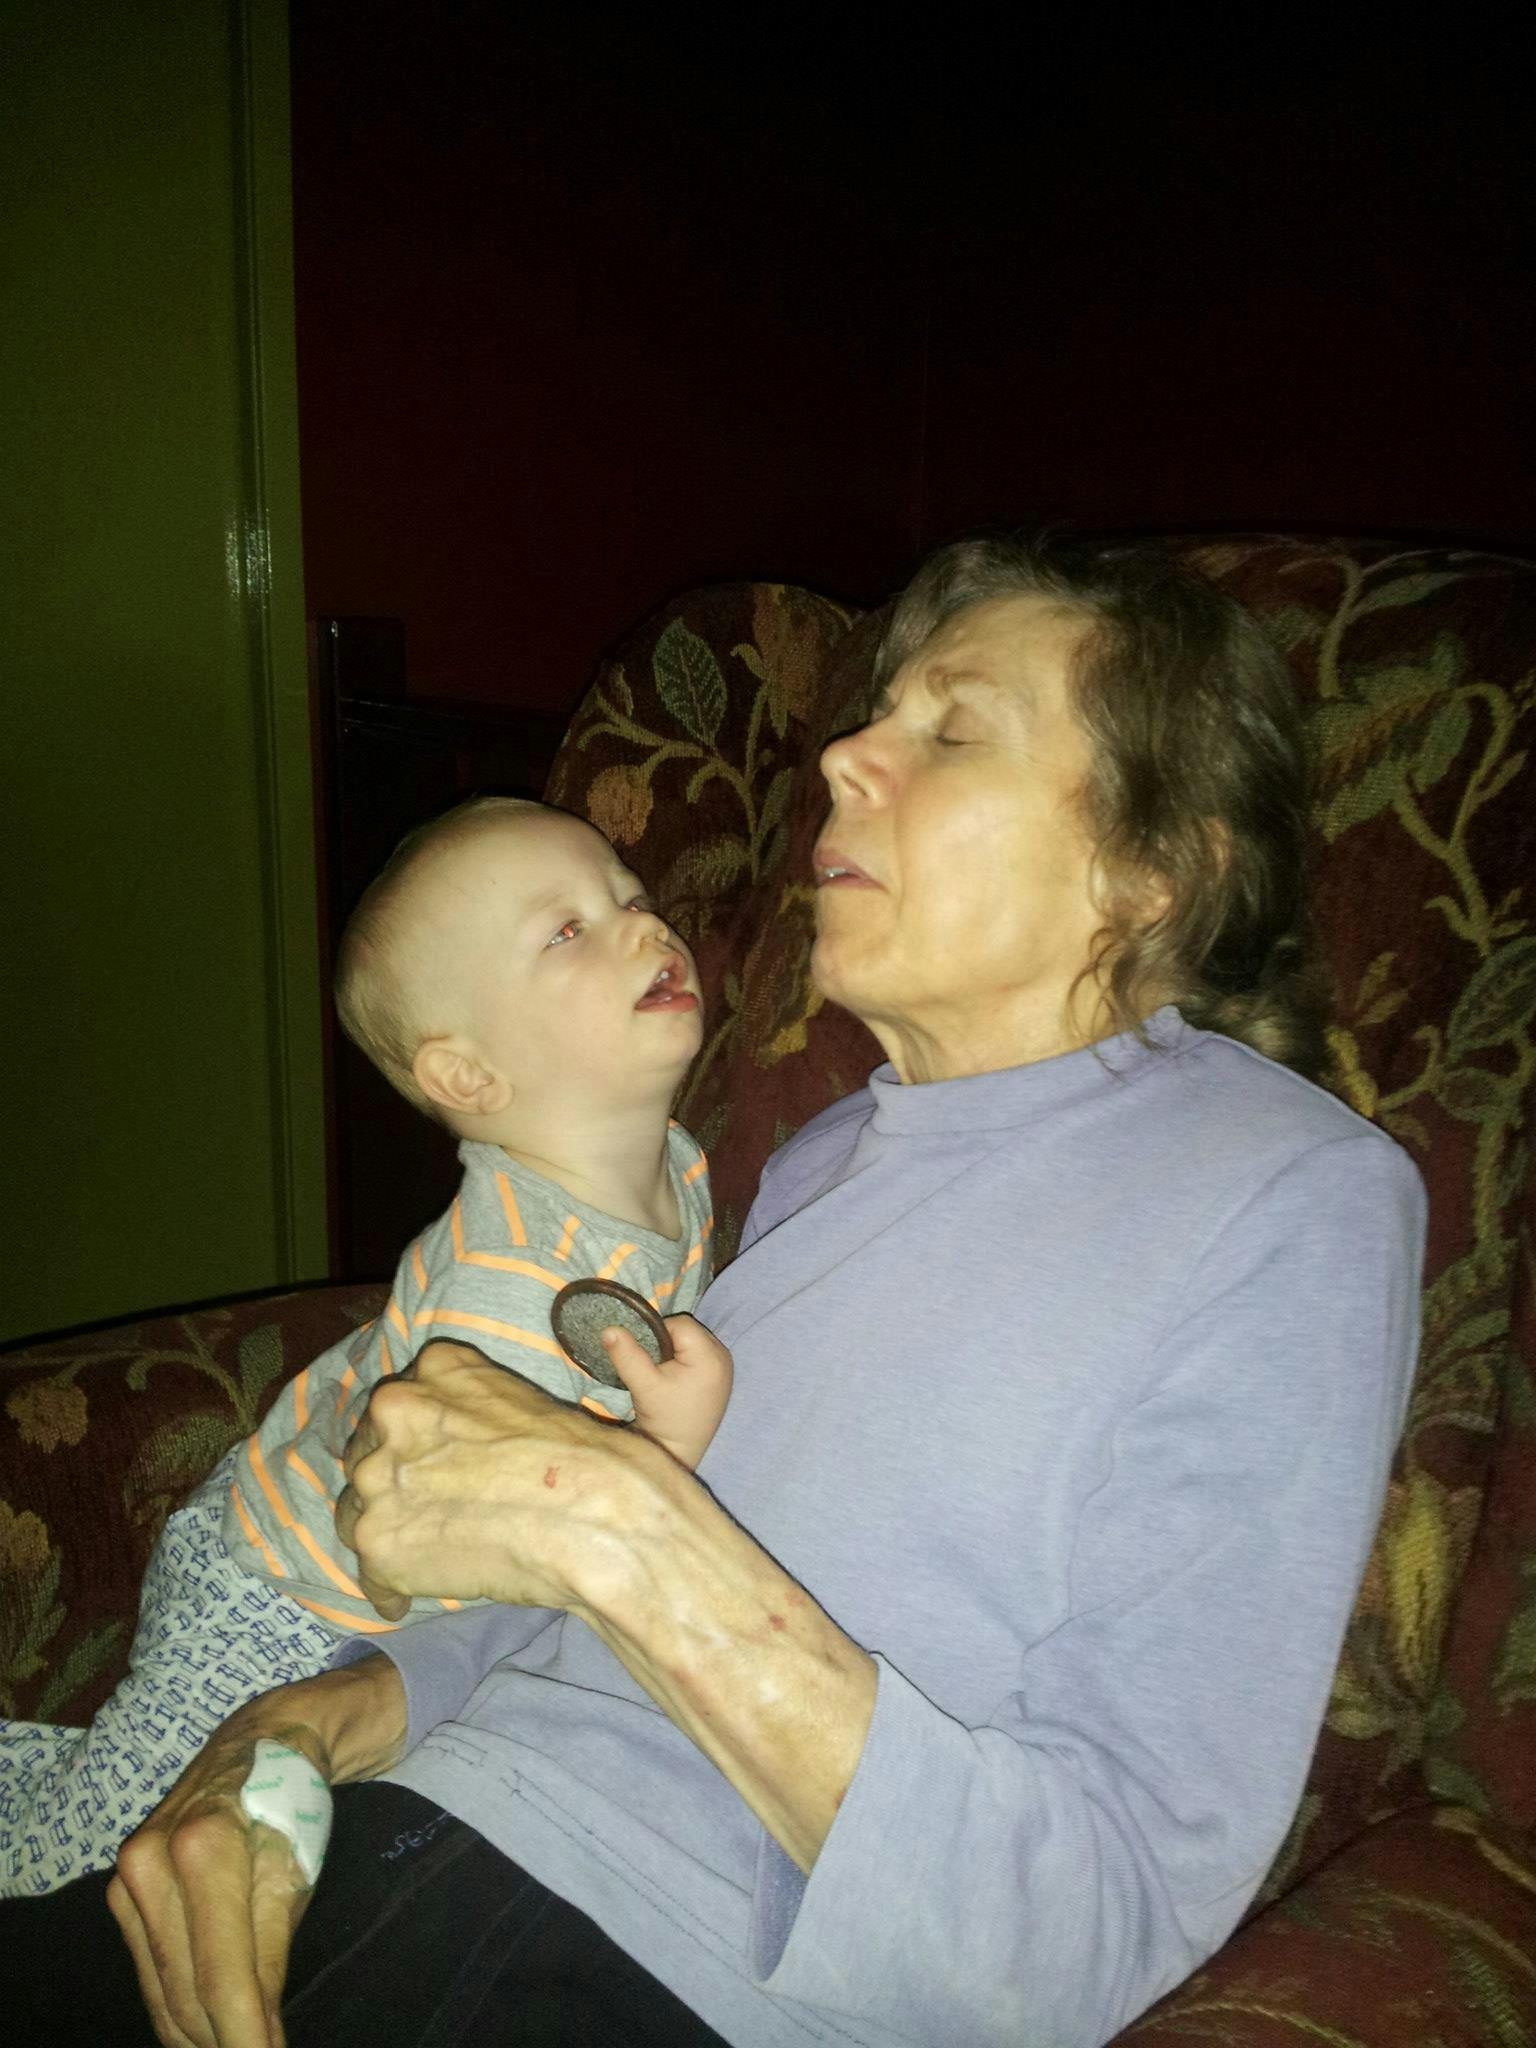 "Cuddles with her 14 month old grandson. He's very careful with her, knows she's special."